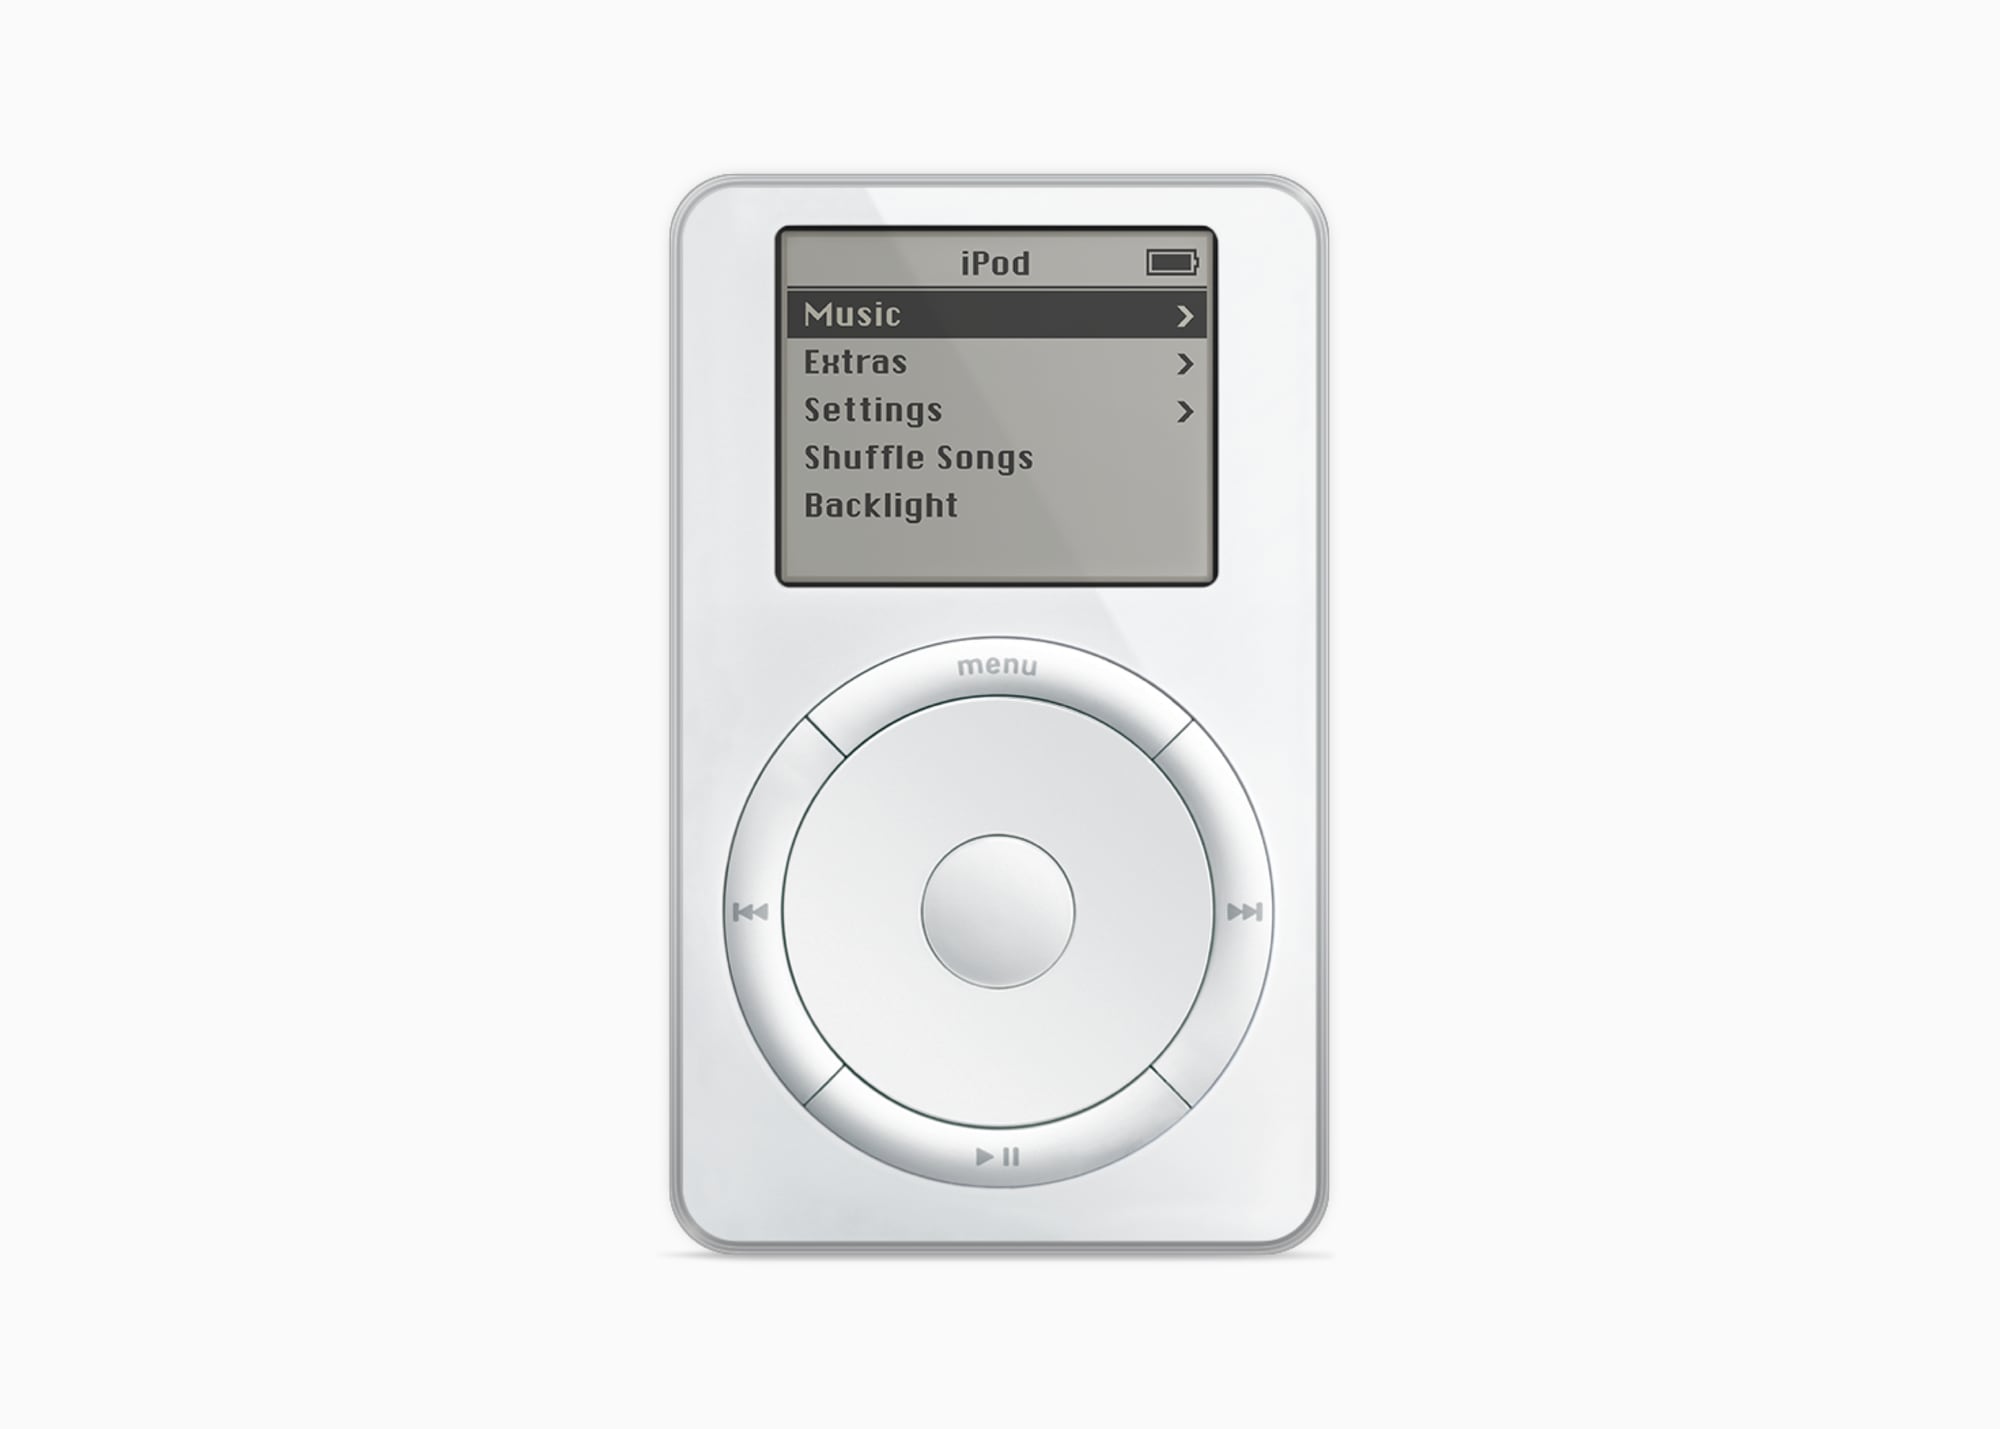 Apple is discontinuing the iPod (BTW, my first-gen iPod still works)